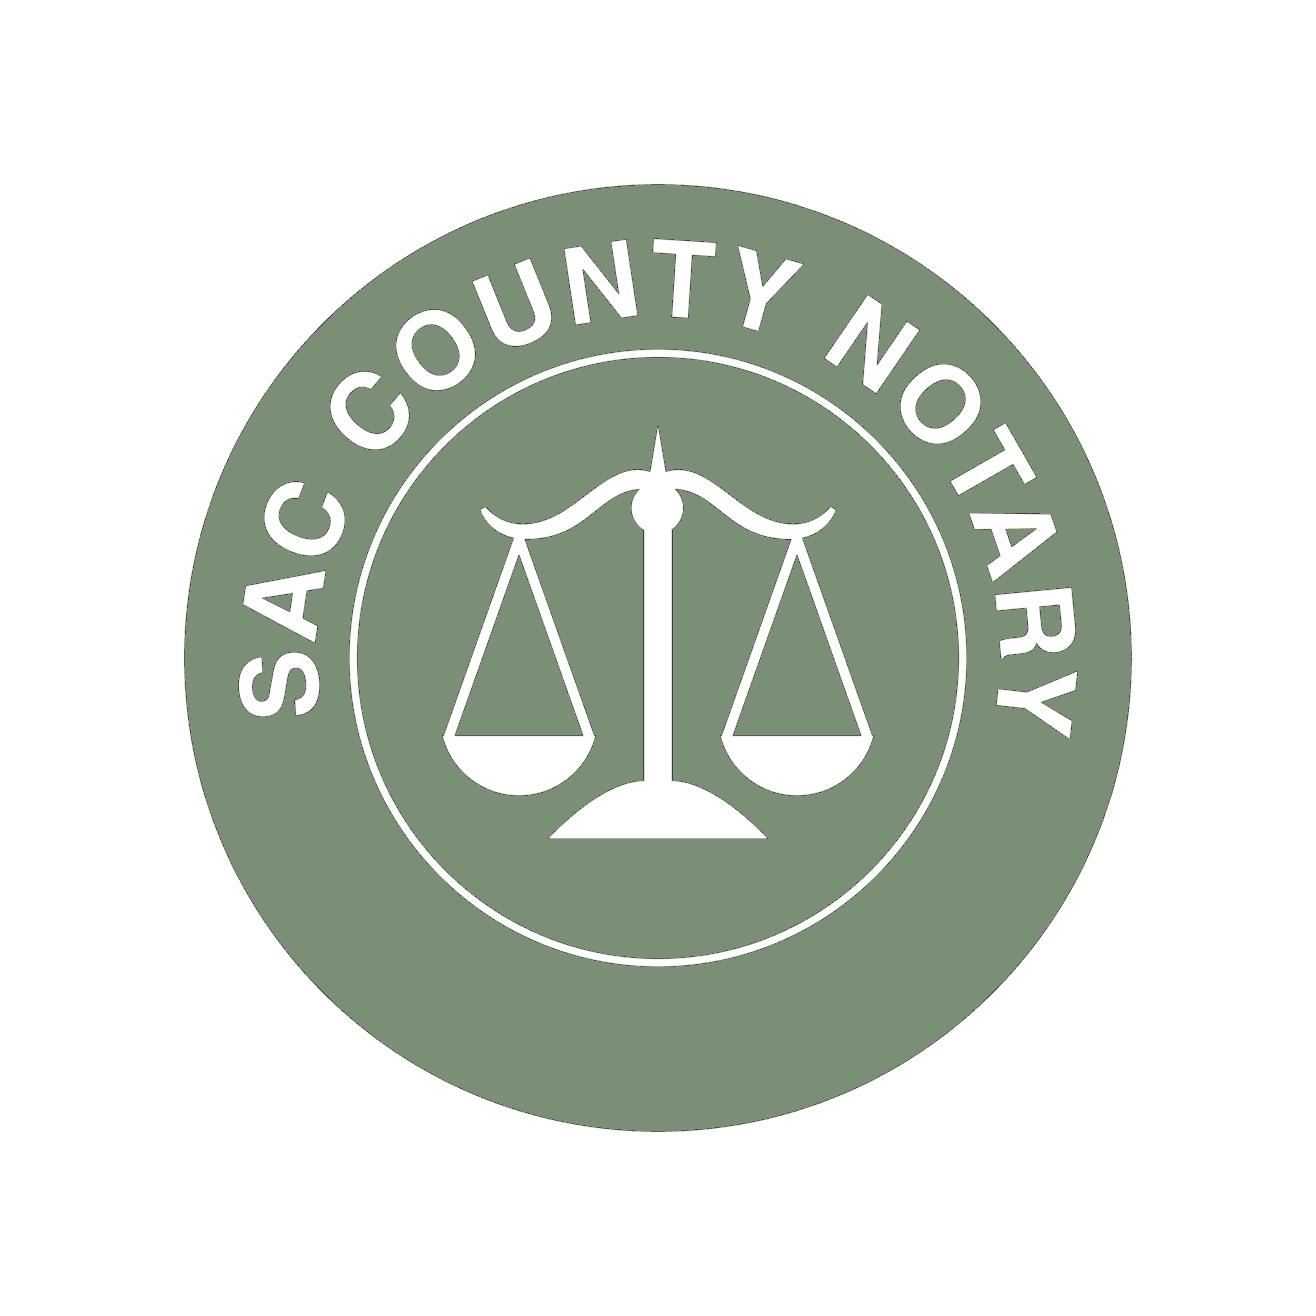 A green background with the words sac county notary in white.